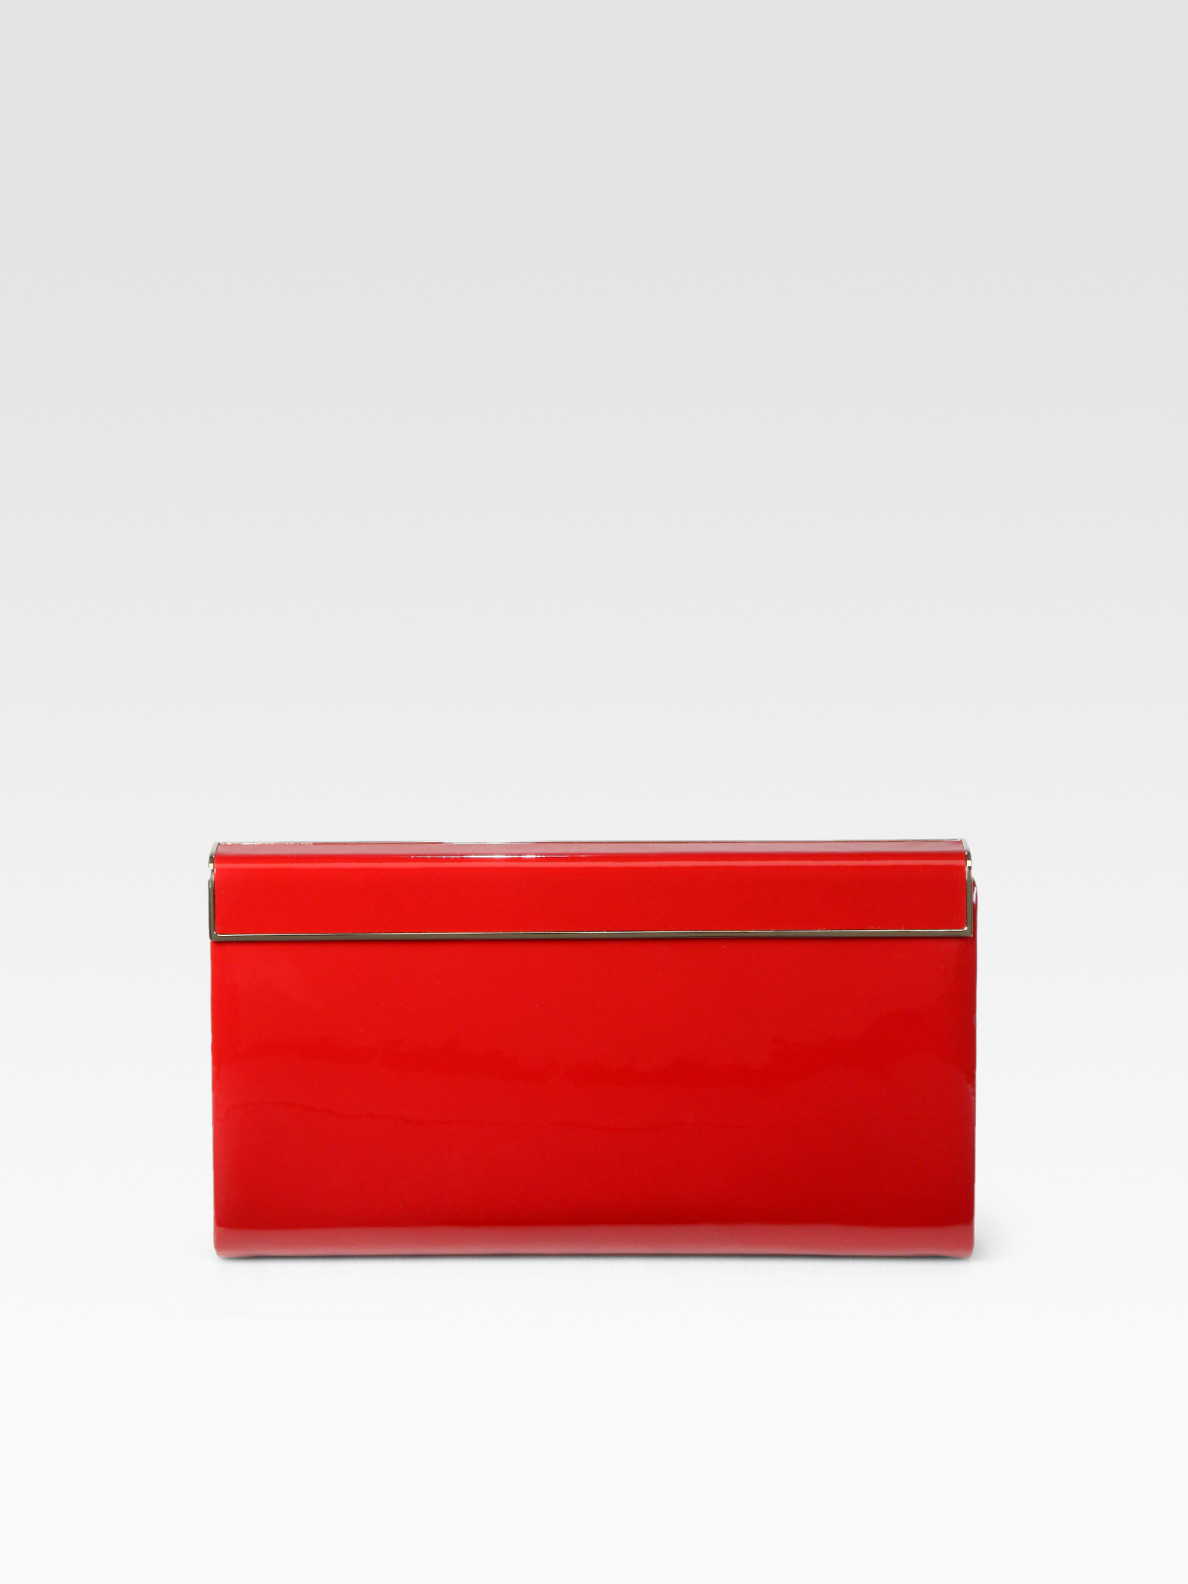 jimmy-choo-red-patent-leather-magnetic-clutch-product-1-3826652-711837207.jpg